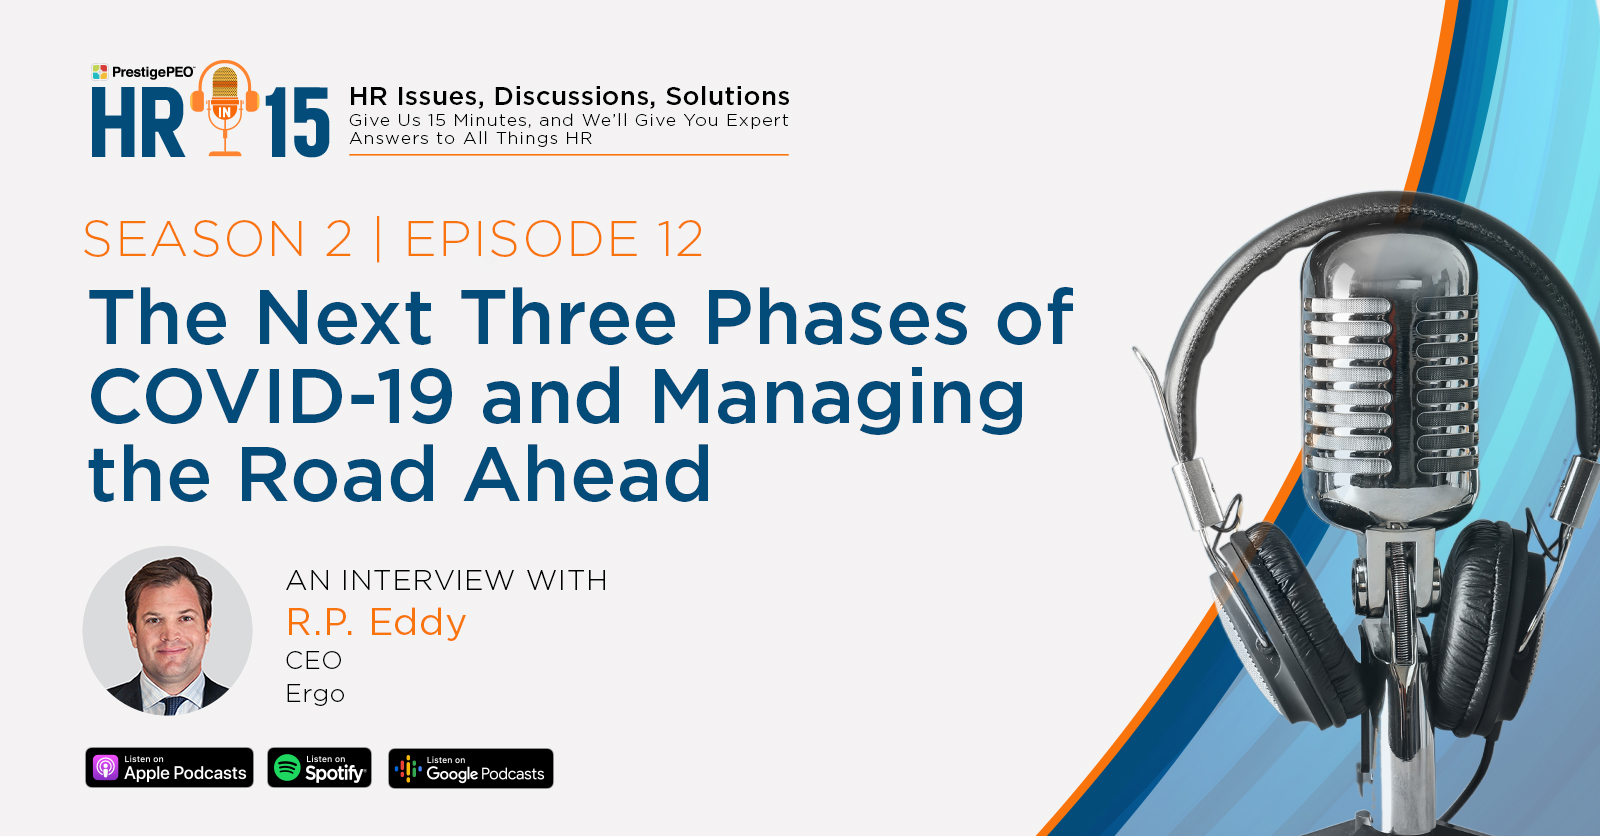 HR-in-15 Interview with R.P. Eddy: The next three phases of COVID-19 and managing the road ahead